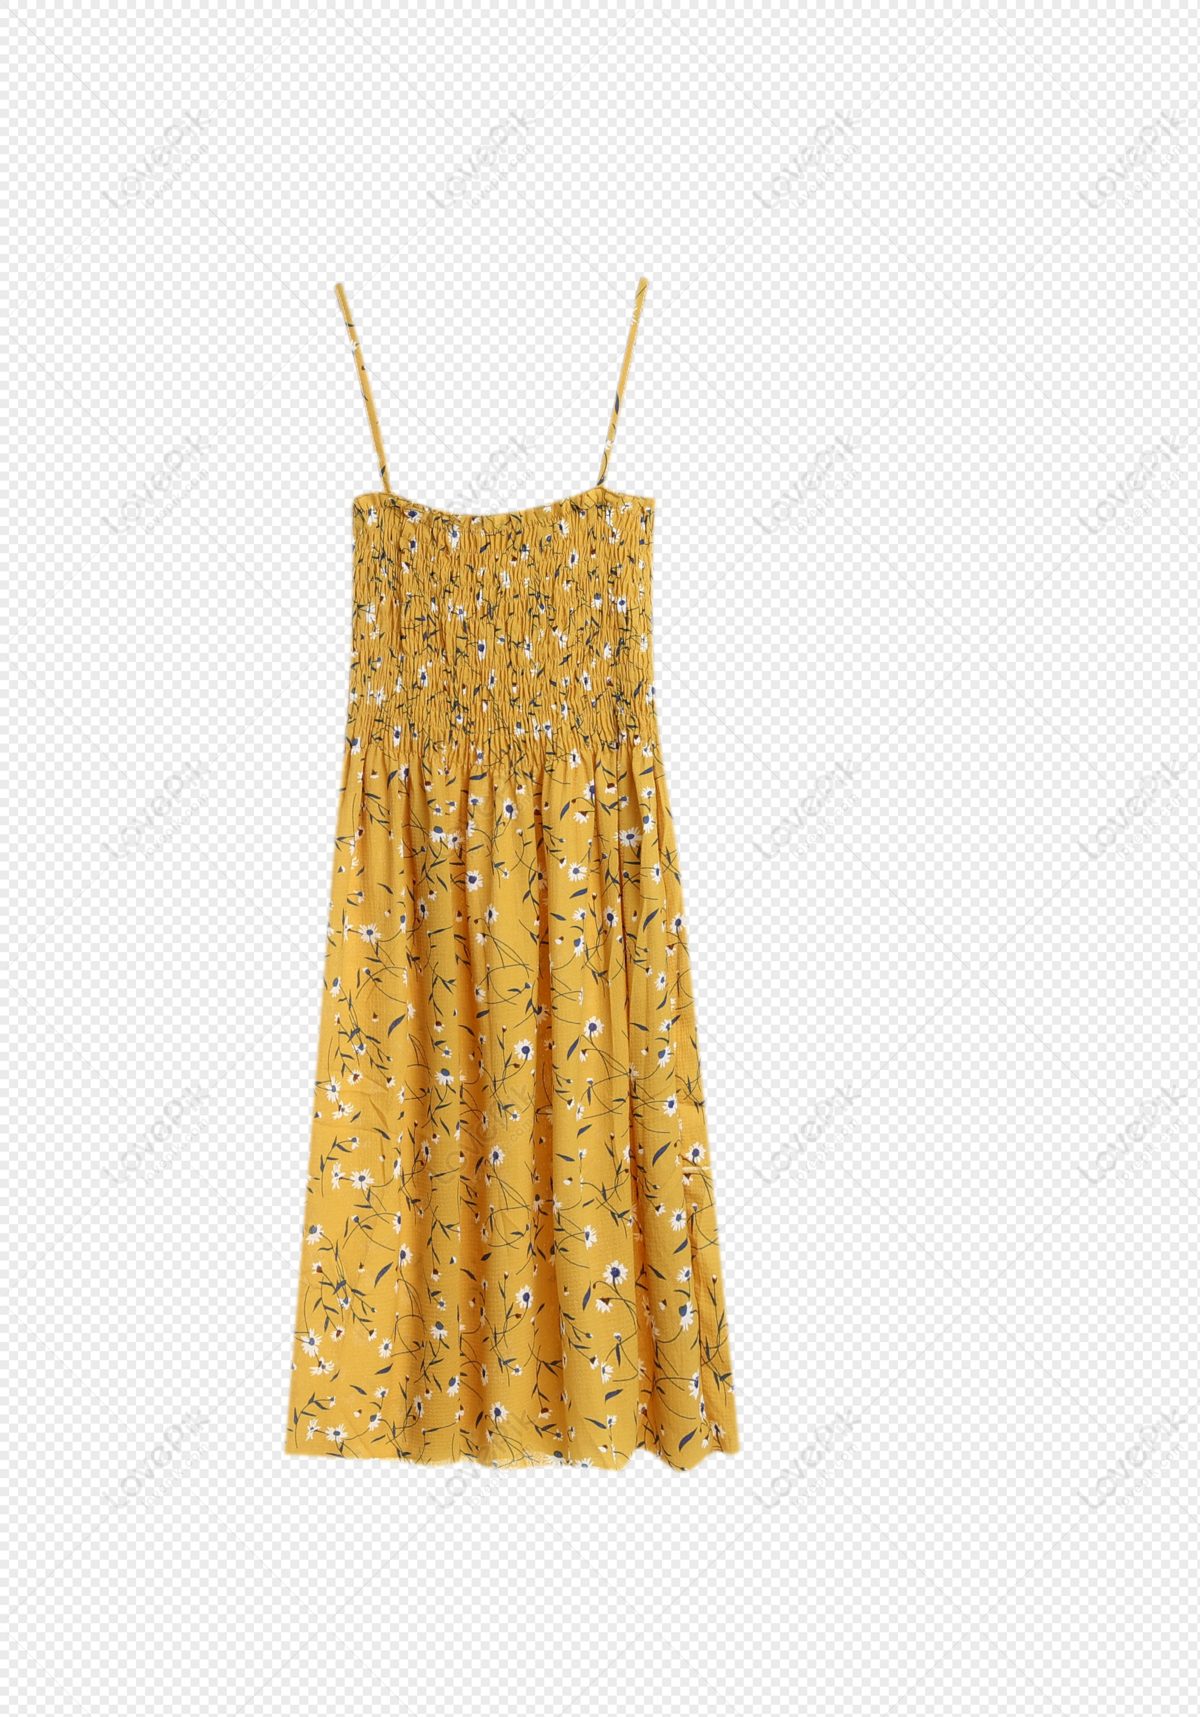 Dress PNG Images With Transparent Background | Free Download On Lovepik